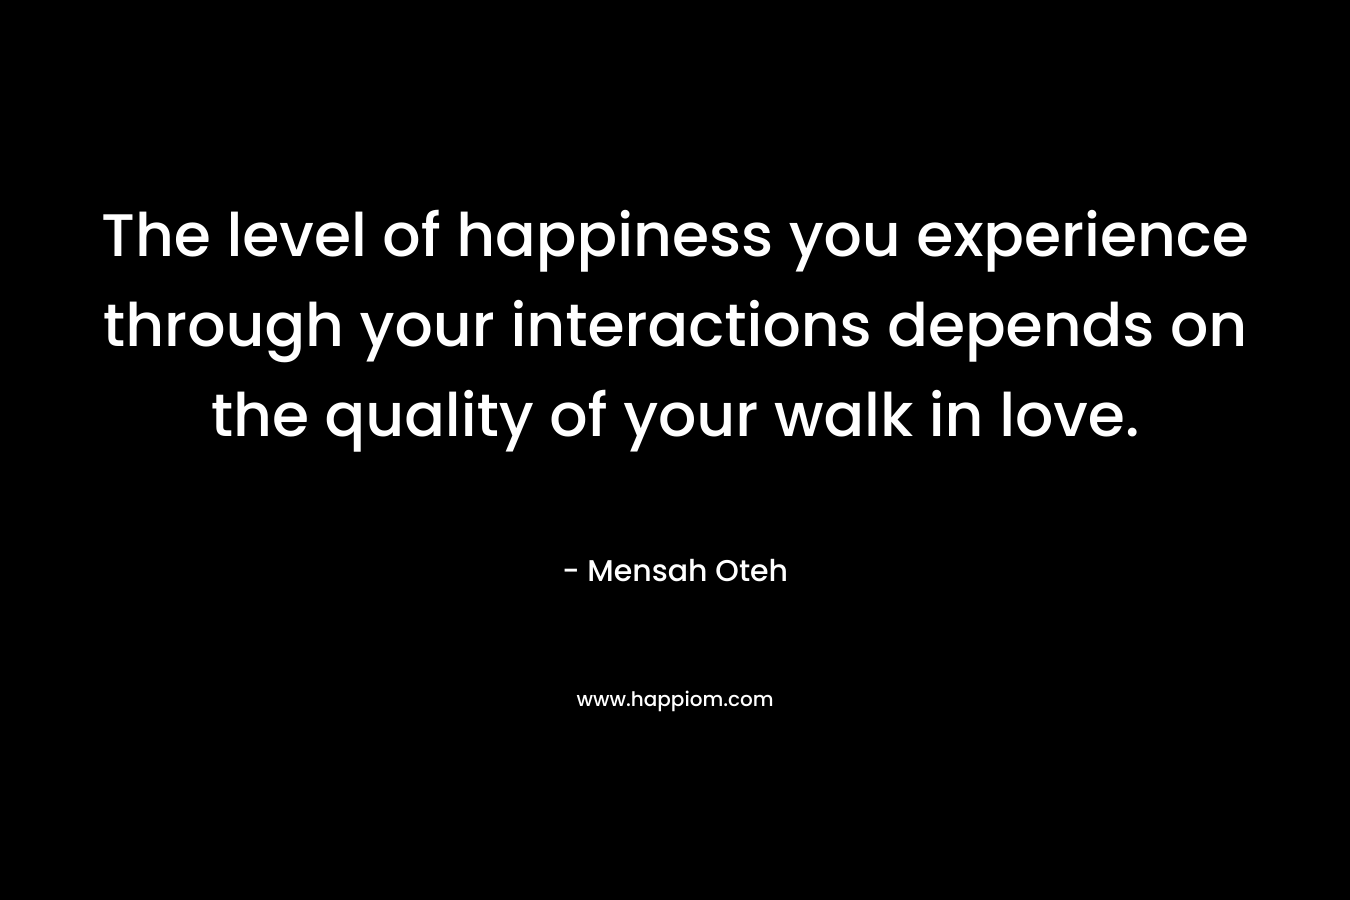 The level of happiness you experience through your interactions depends on the quality of your walk in love.